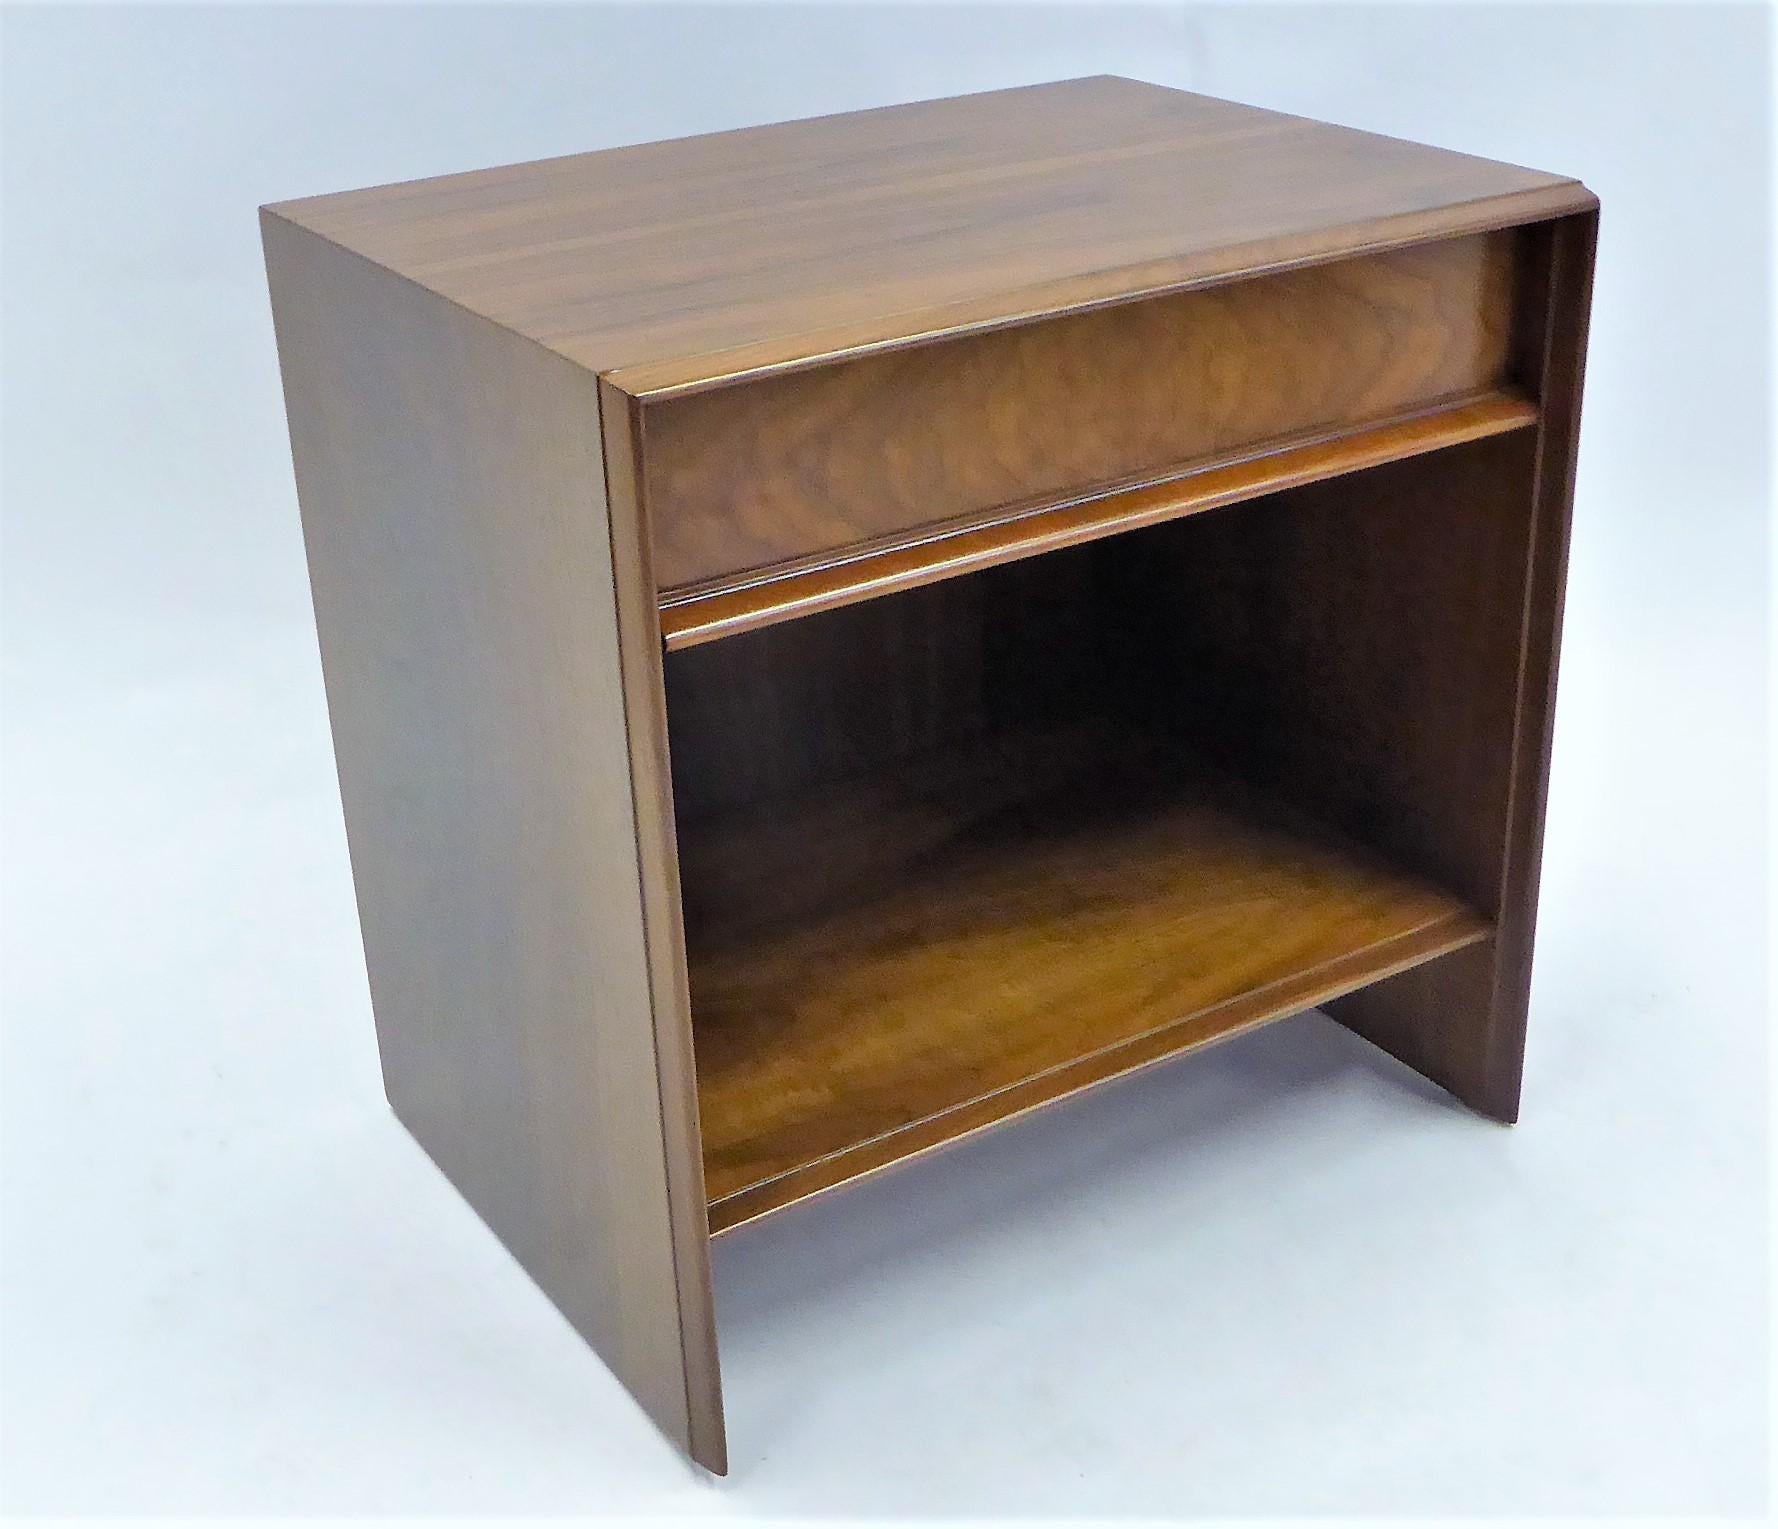 Beautifully figured black walnut highlights this Robsjohn-Gibbings bedside table or nightstand for Widdicomb. With an upper single drawer and open cubbyhole shelf below, perfect for a few favourite books. In very nice original condition, recently